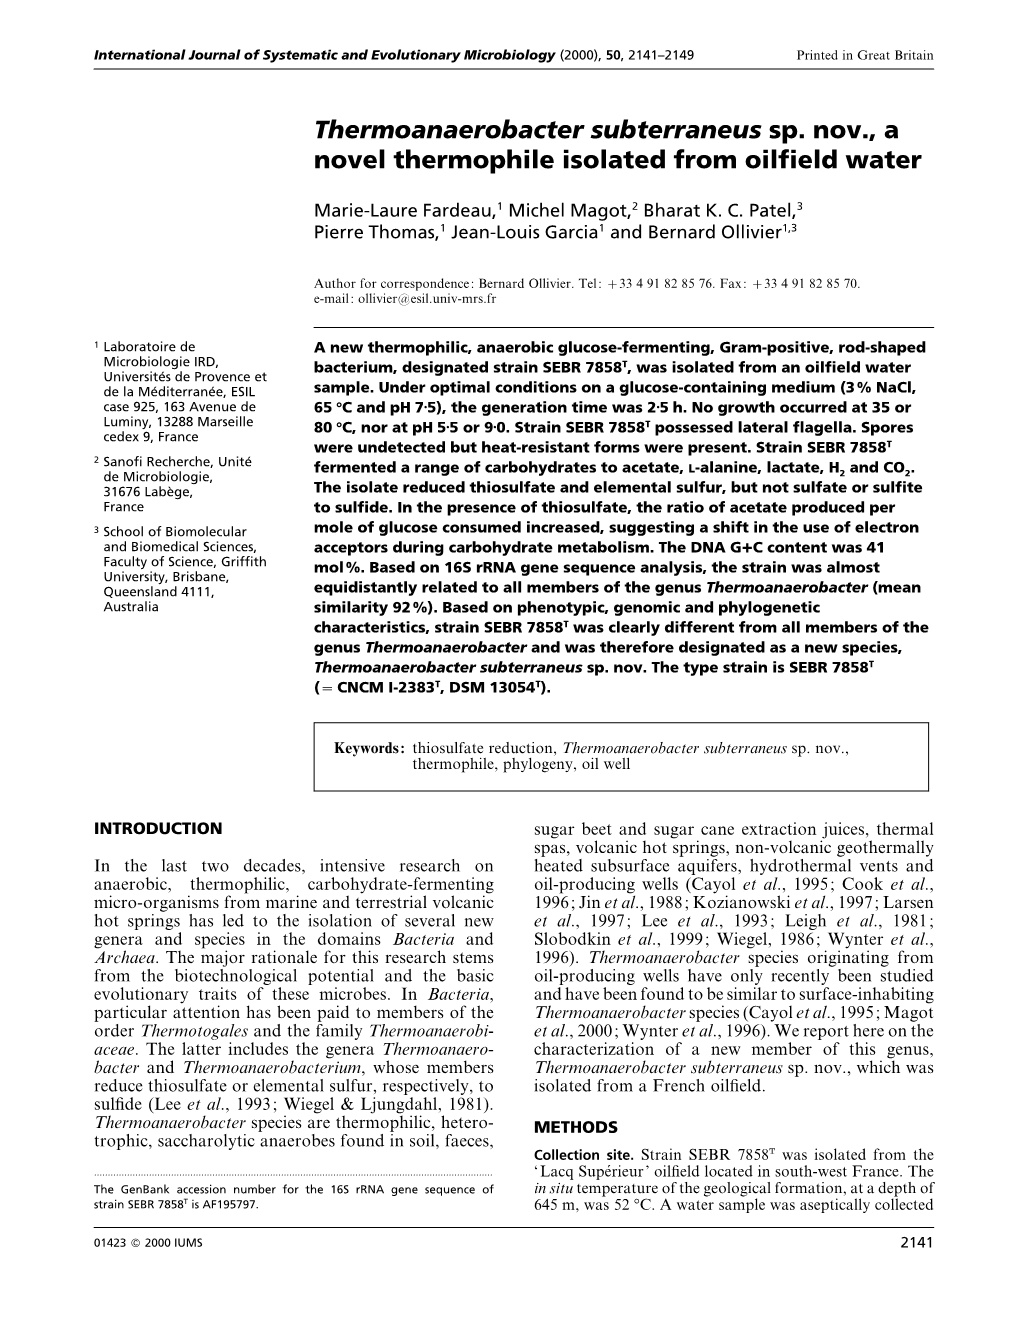 Thermoanaerobacter Subterraneus Sp. Nov., a Novel Thermophile Isolated from Oilﬁeld Water